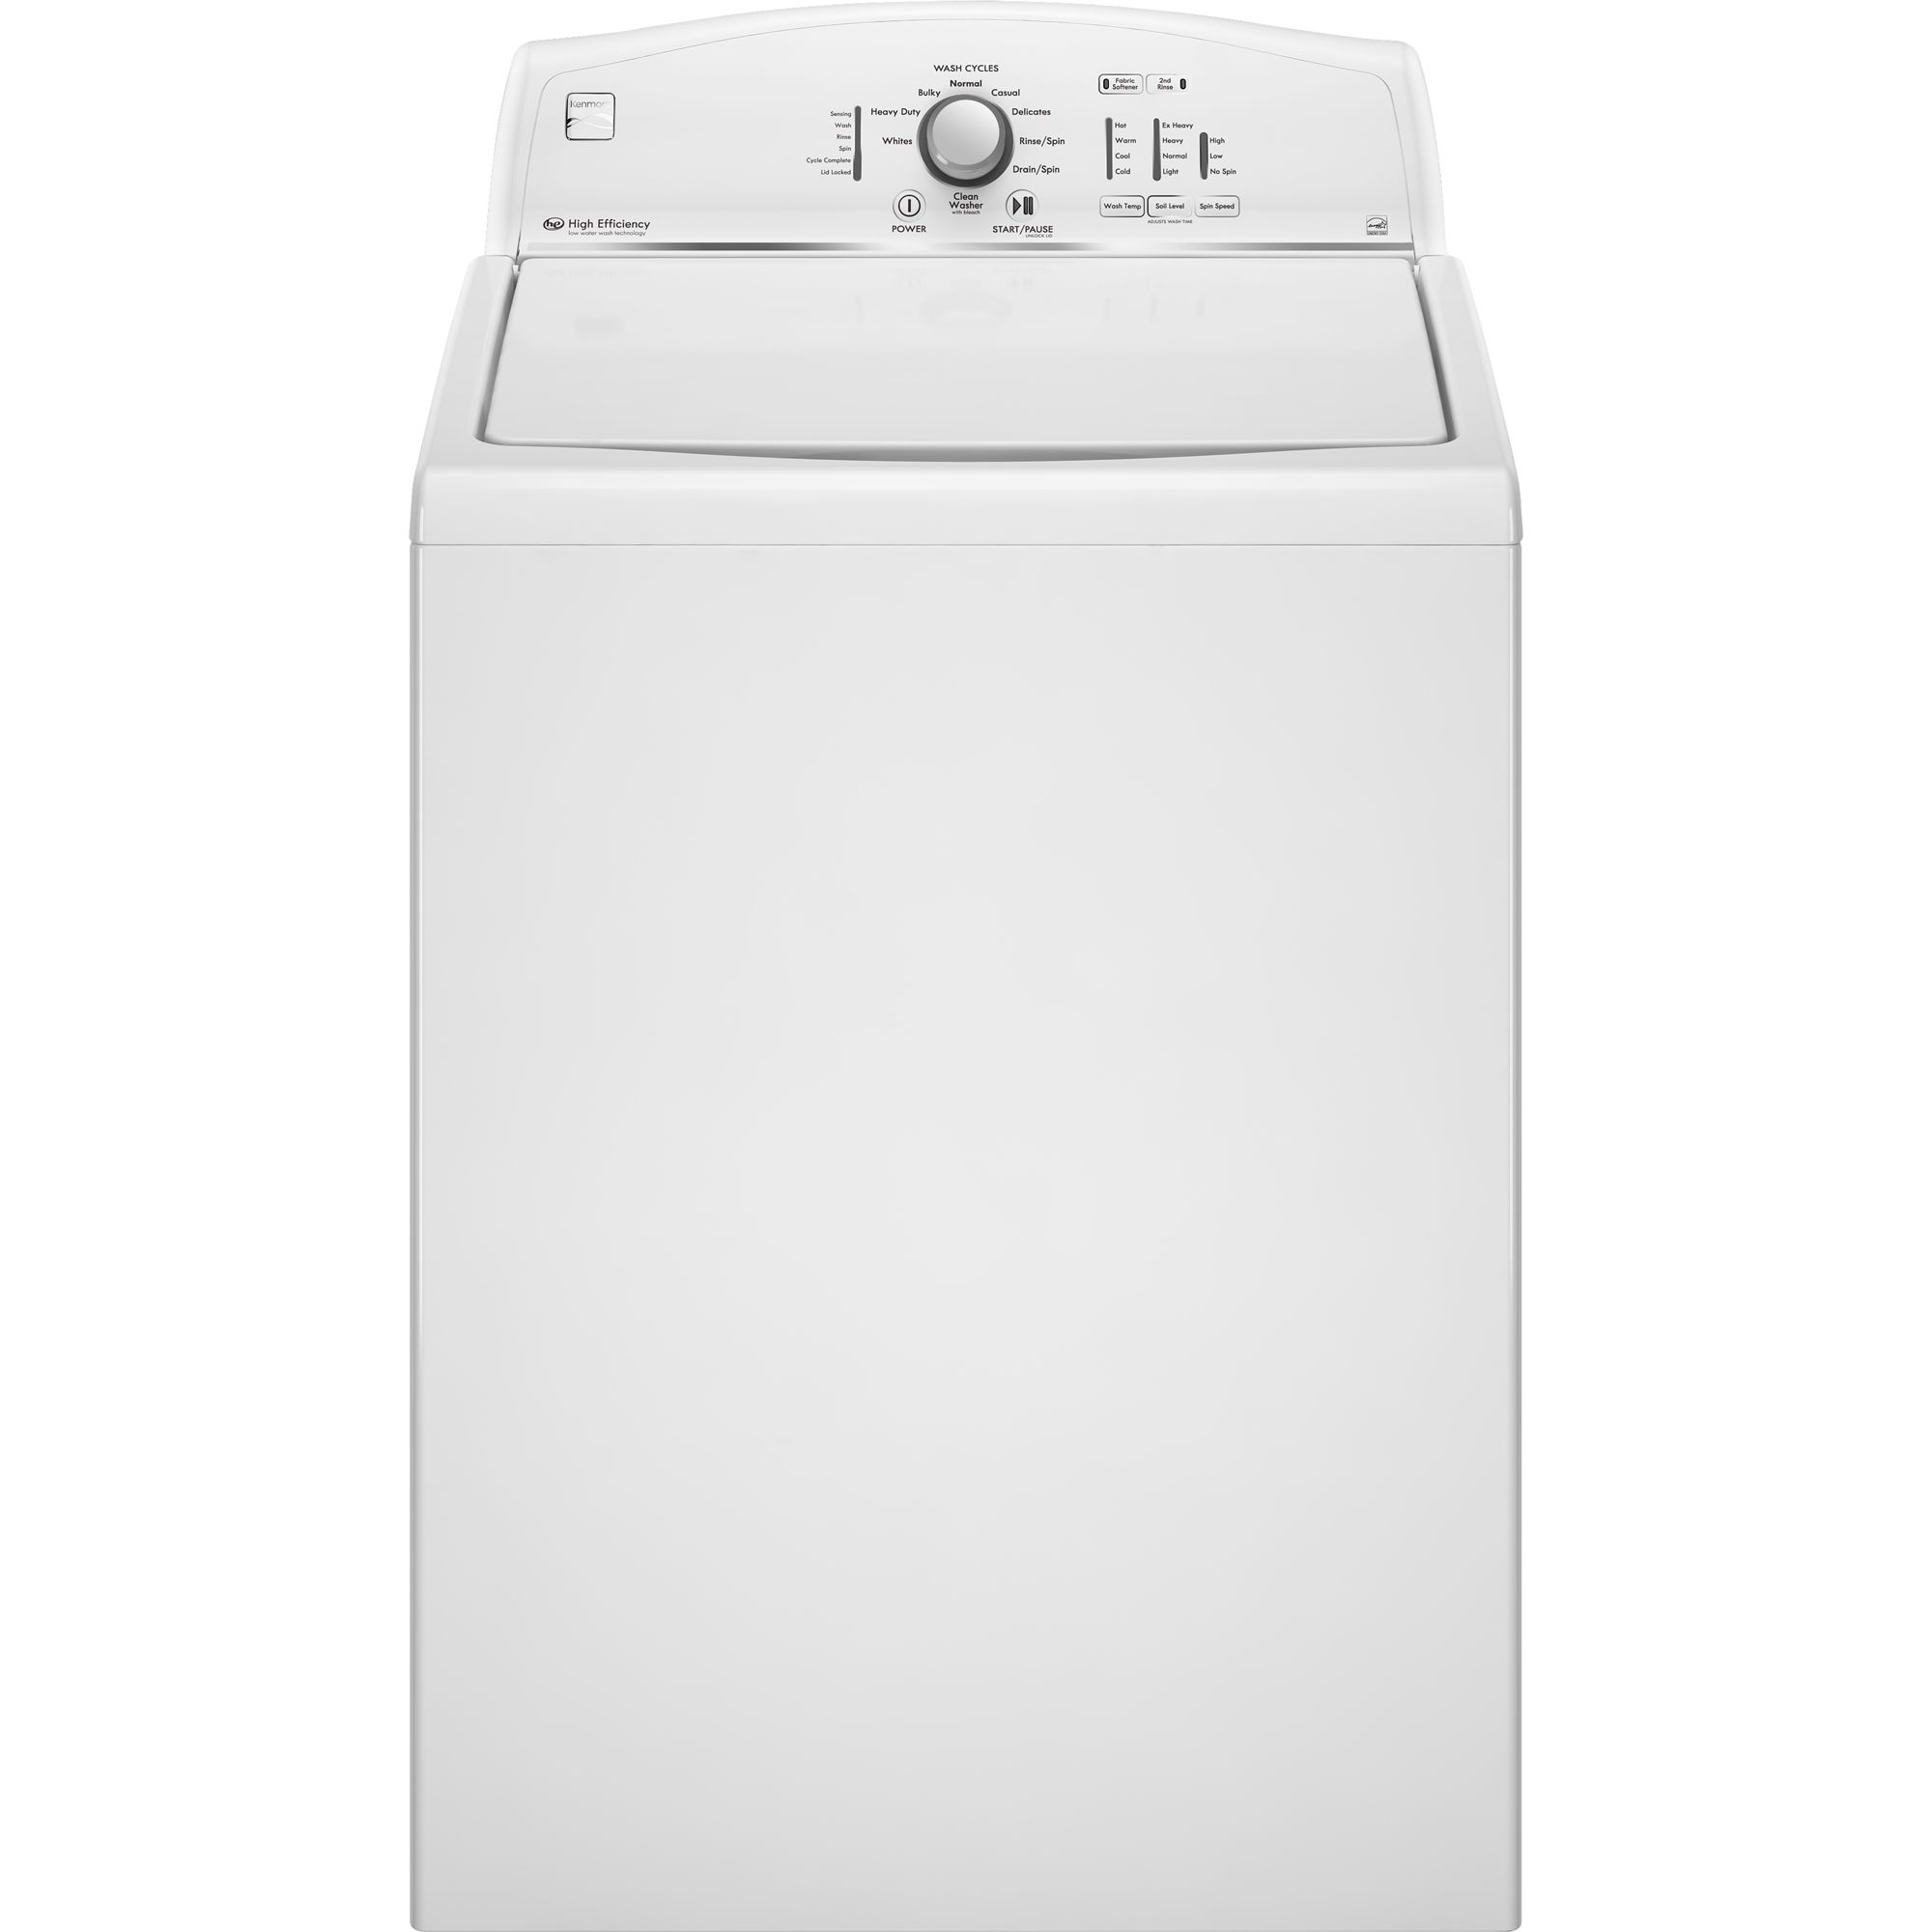 Kenmore 26002 3.6 cu. ft. High-Efficiency Top-Load Washer - White | Shop Your Way: Online 